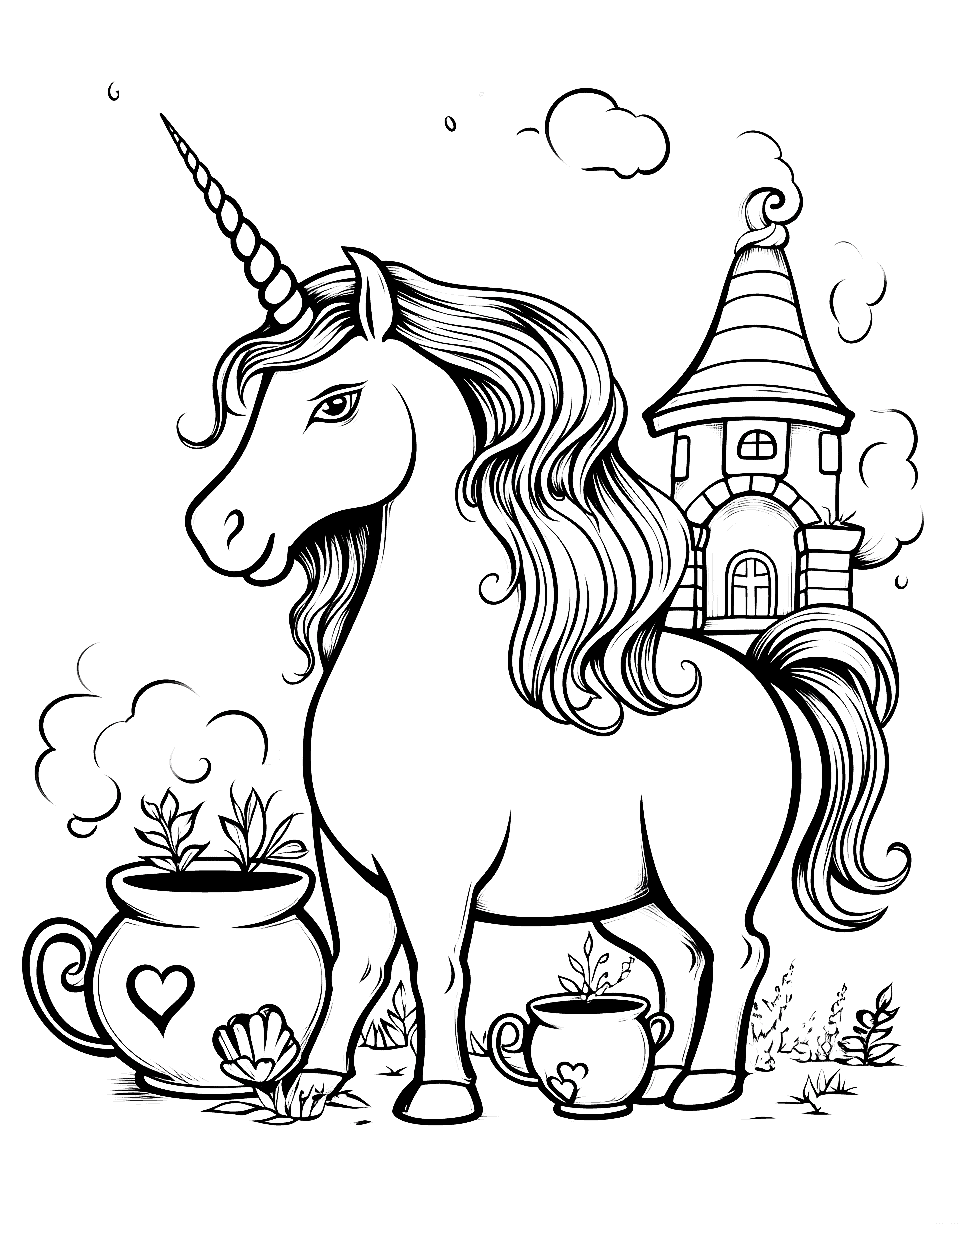 Unicorn and Castle Shaped House Coloring Page - A whimsical scene of a unicorn visiting a Castle shaped house, surrounded by teacup and teapot-shaped items.